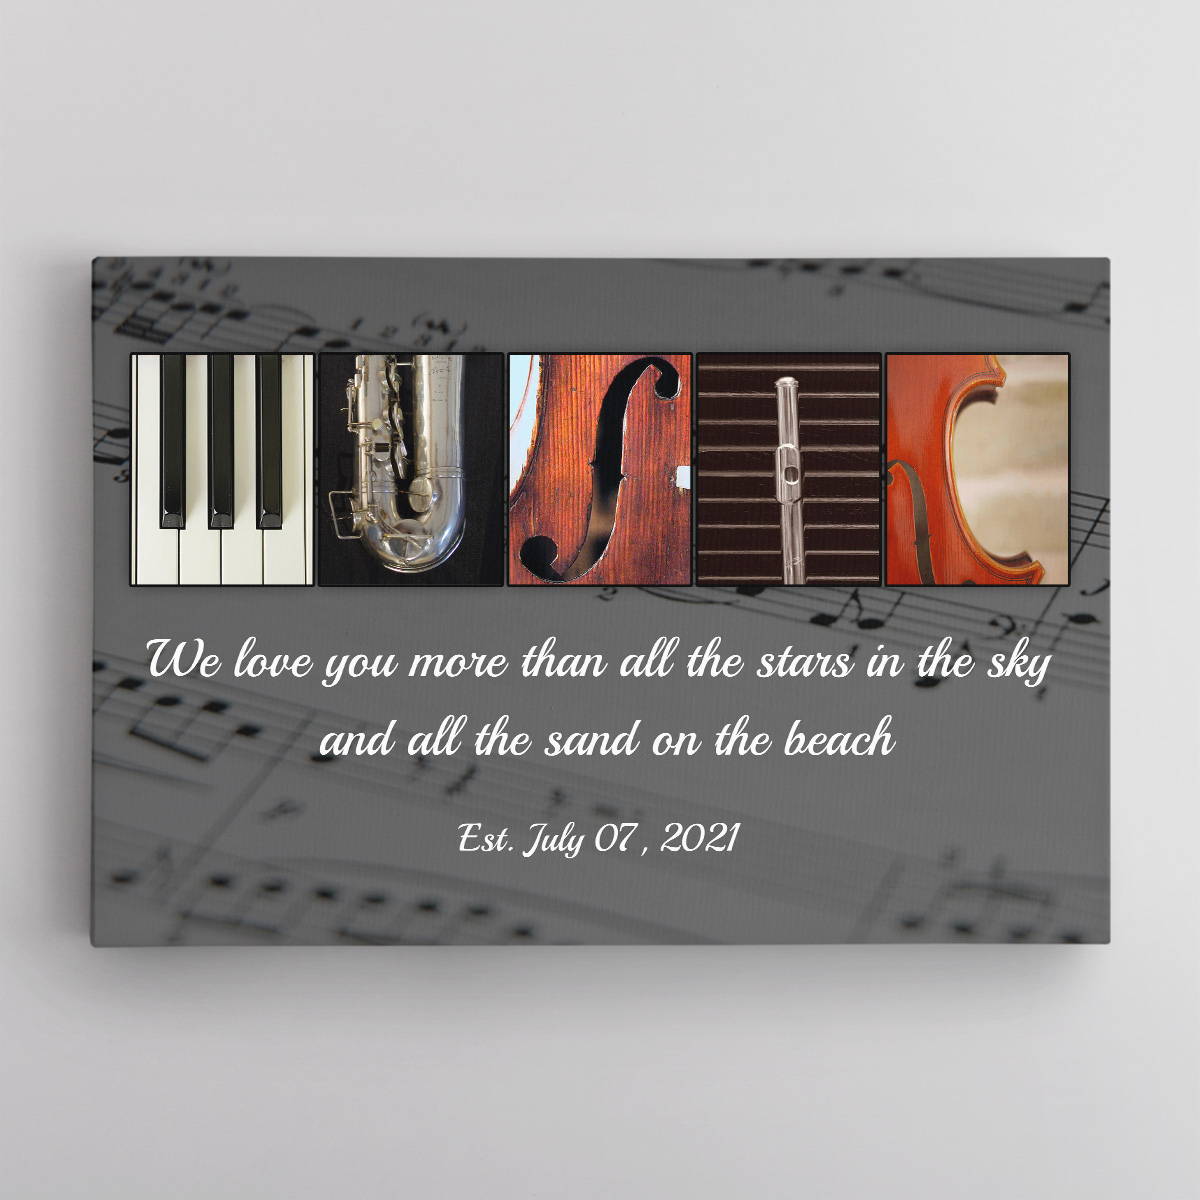 Your loved ones are musicians? Wow, that’s a challenge to pick a suitable gift for them. But this wall art can handle it. The music-themed letter photos with your personal message would surely melt their hearts.